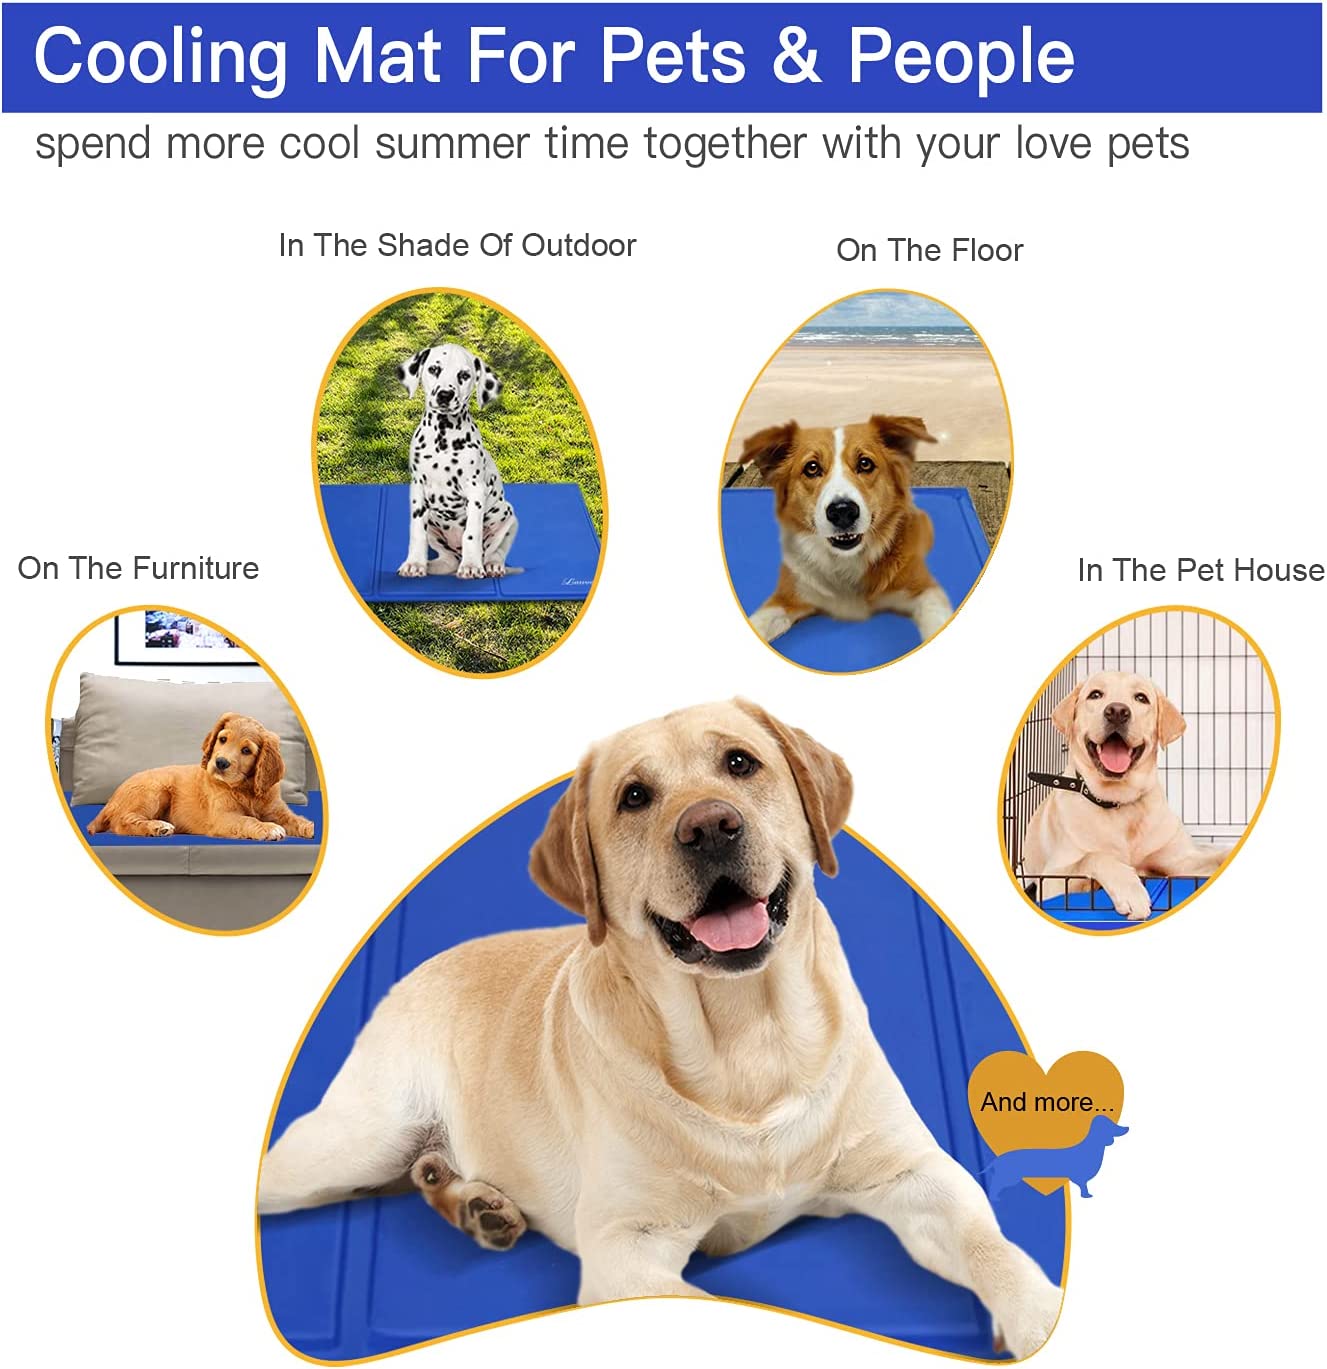 Cooling mat for dogs - keep your pet cool this summer